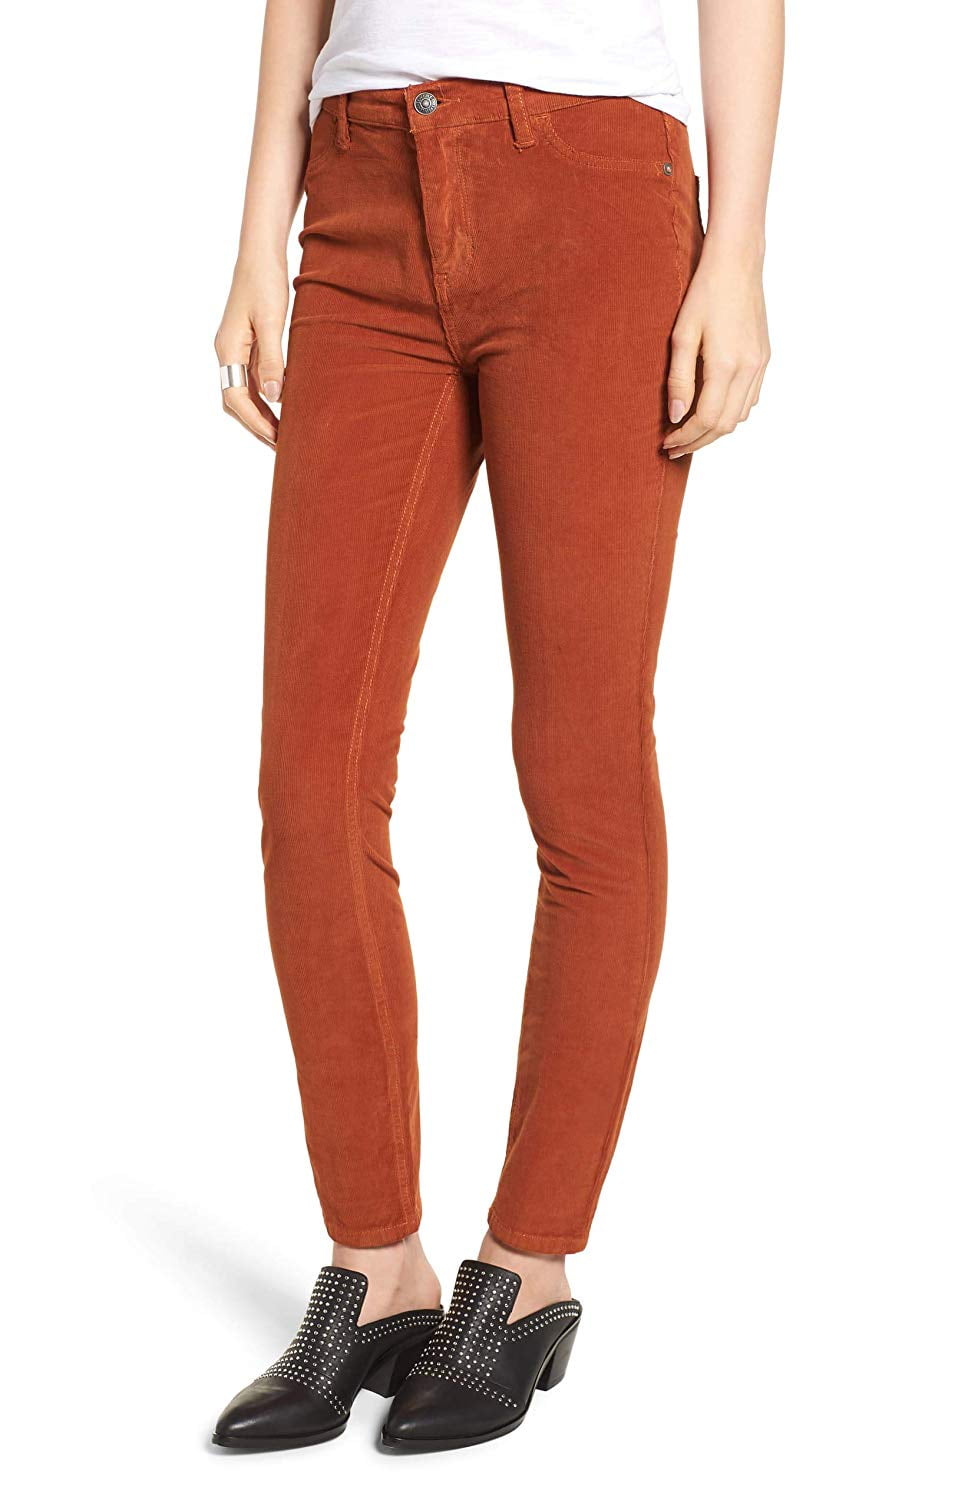 Free People Pants - Womens Pants Solid Skinny Corduroys Stretch 28 ...